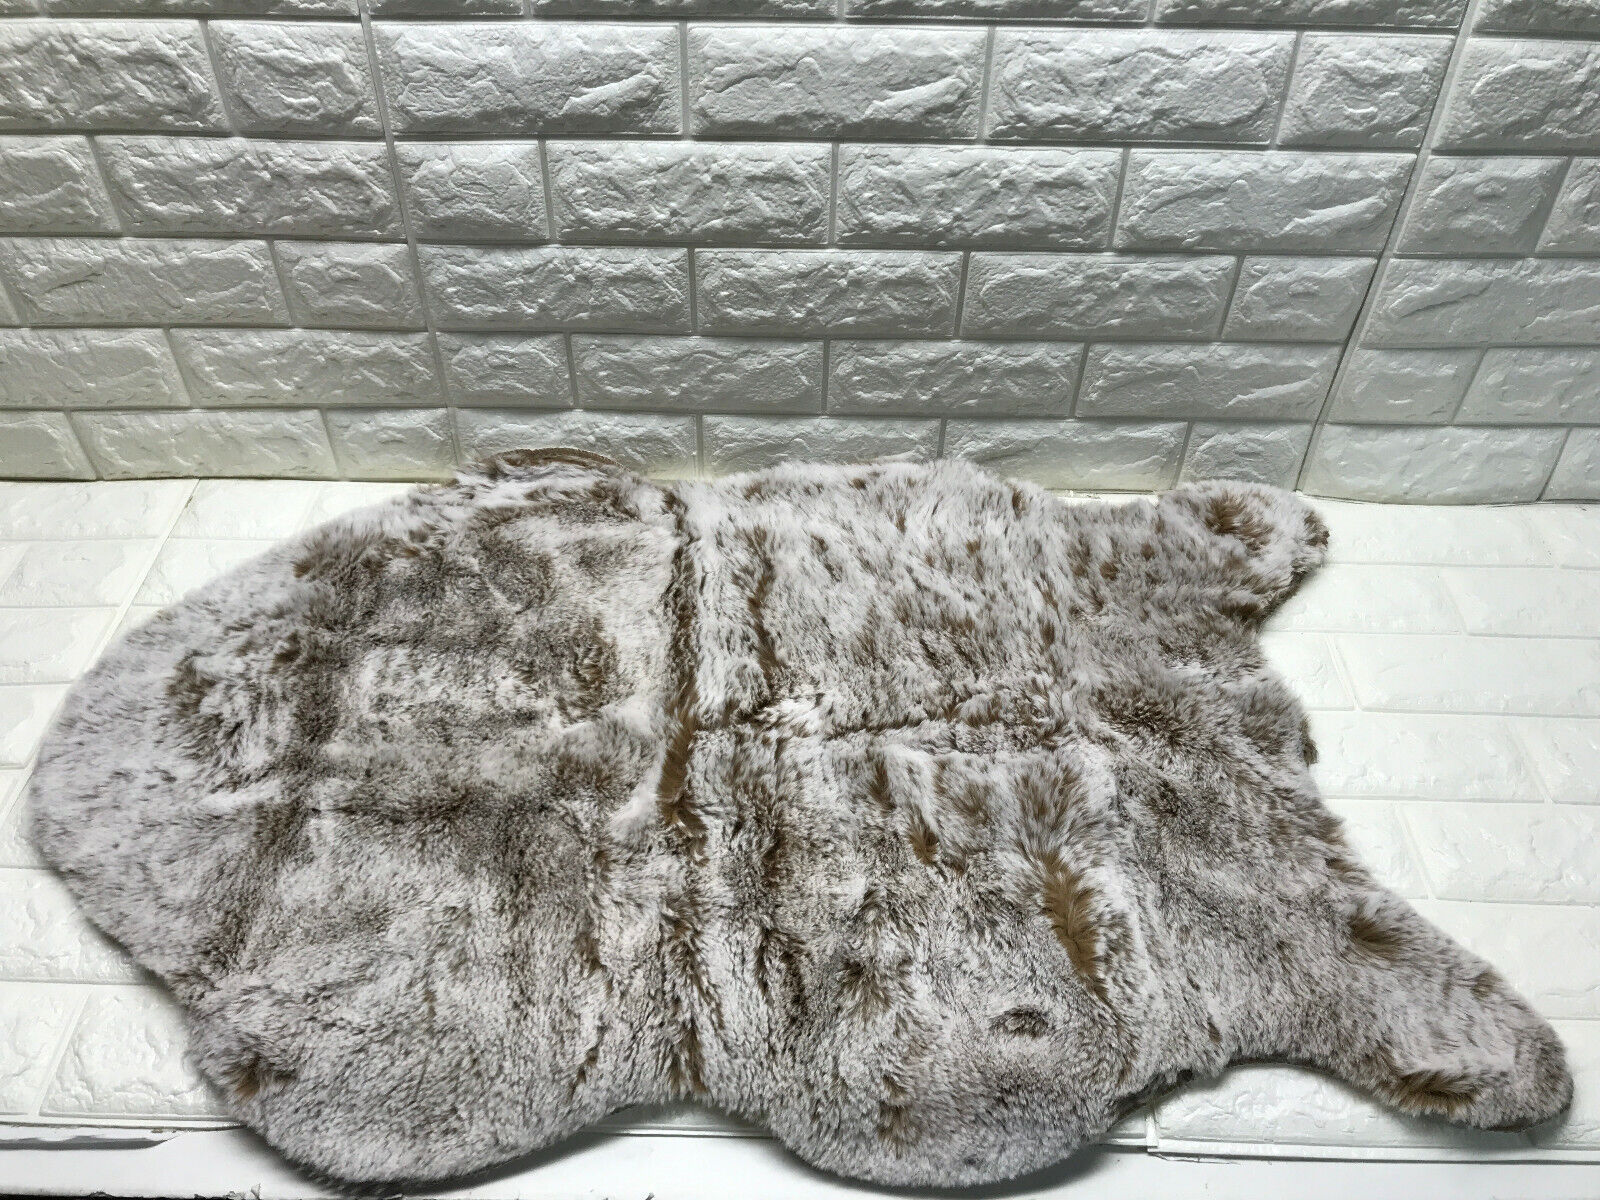 Lot of 2pcs Soft Faux Rabbit Fur Chair Couch Cover Area Rug 2ft x 3ft Unbranded